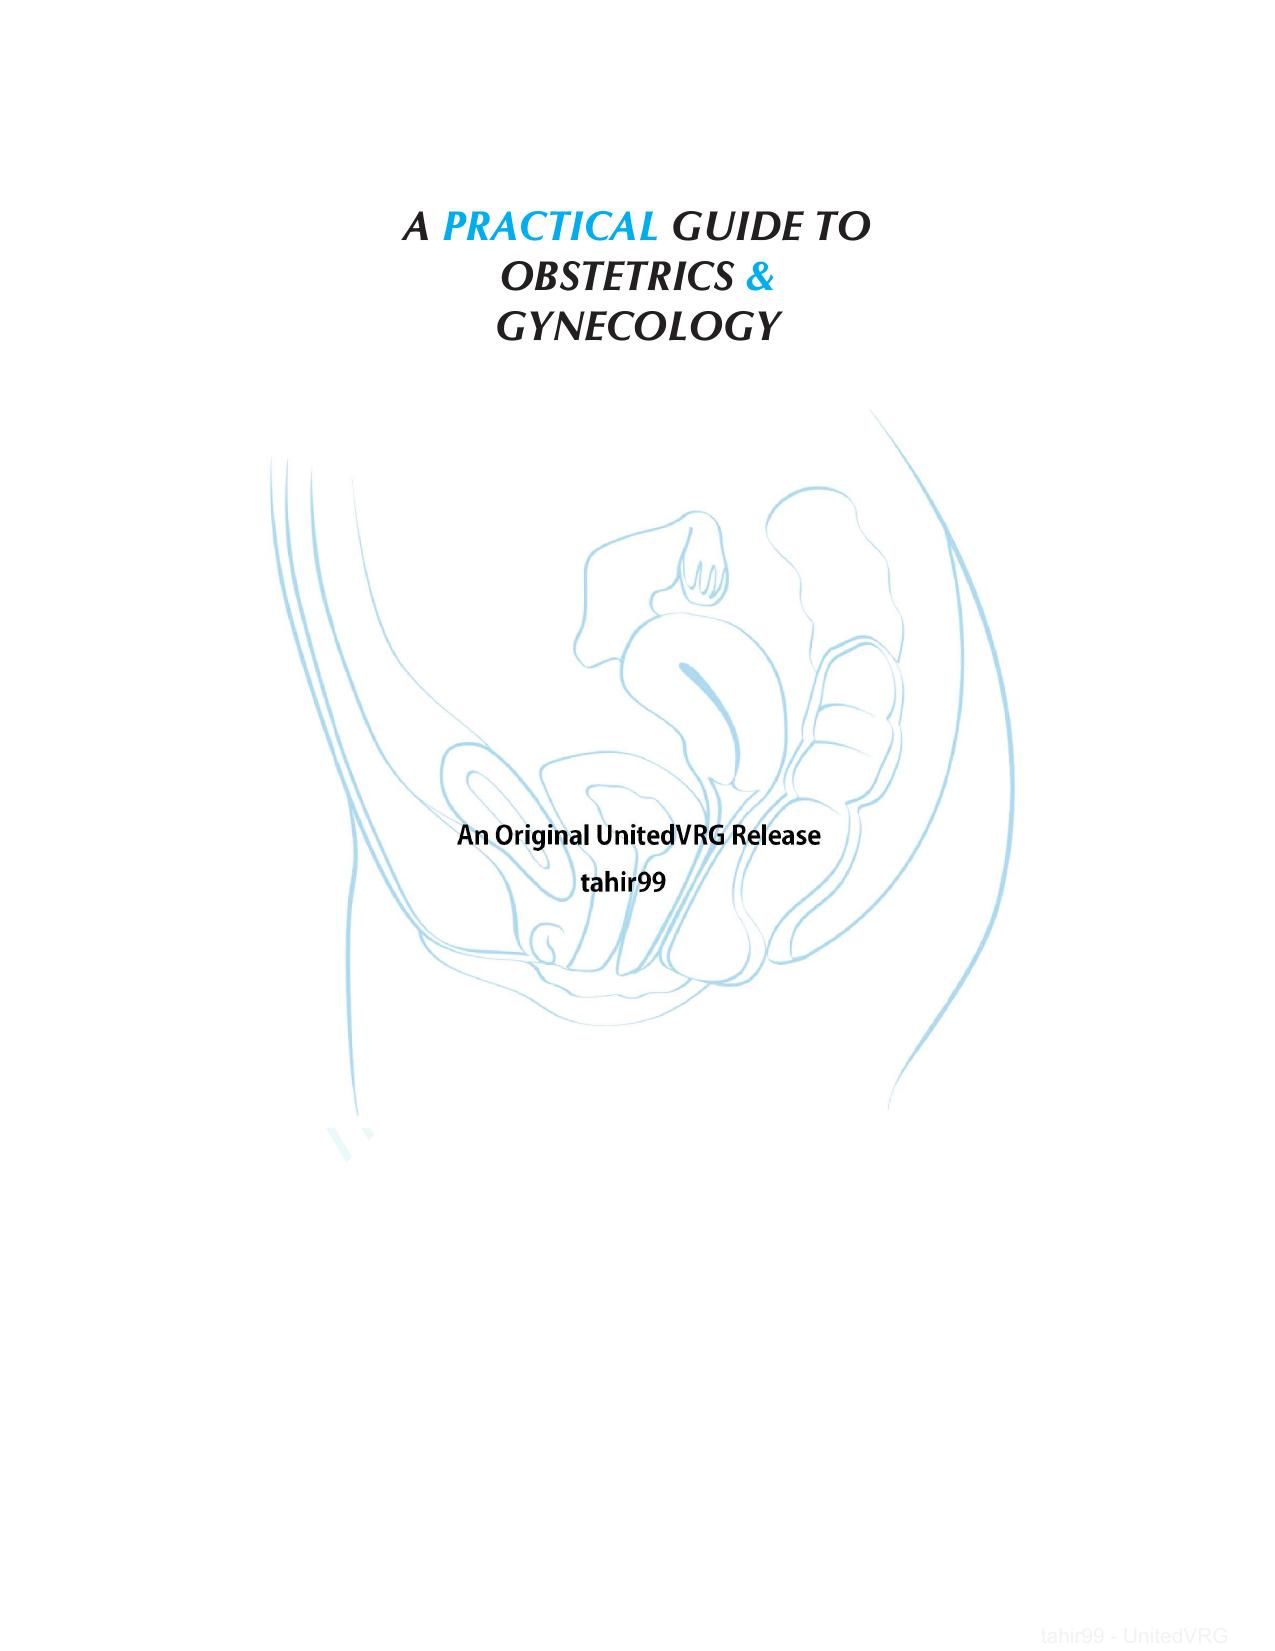 Practical Obstetrics and Gynecology 2015